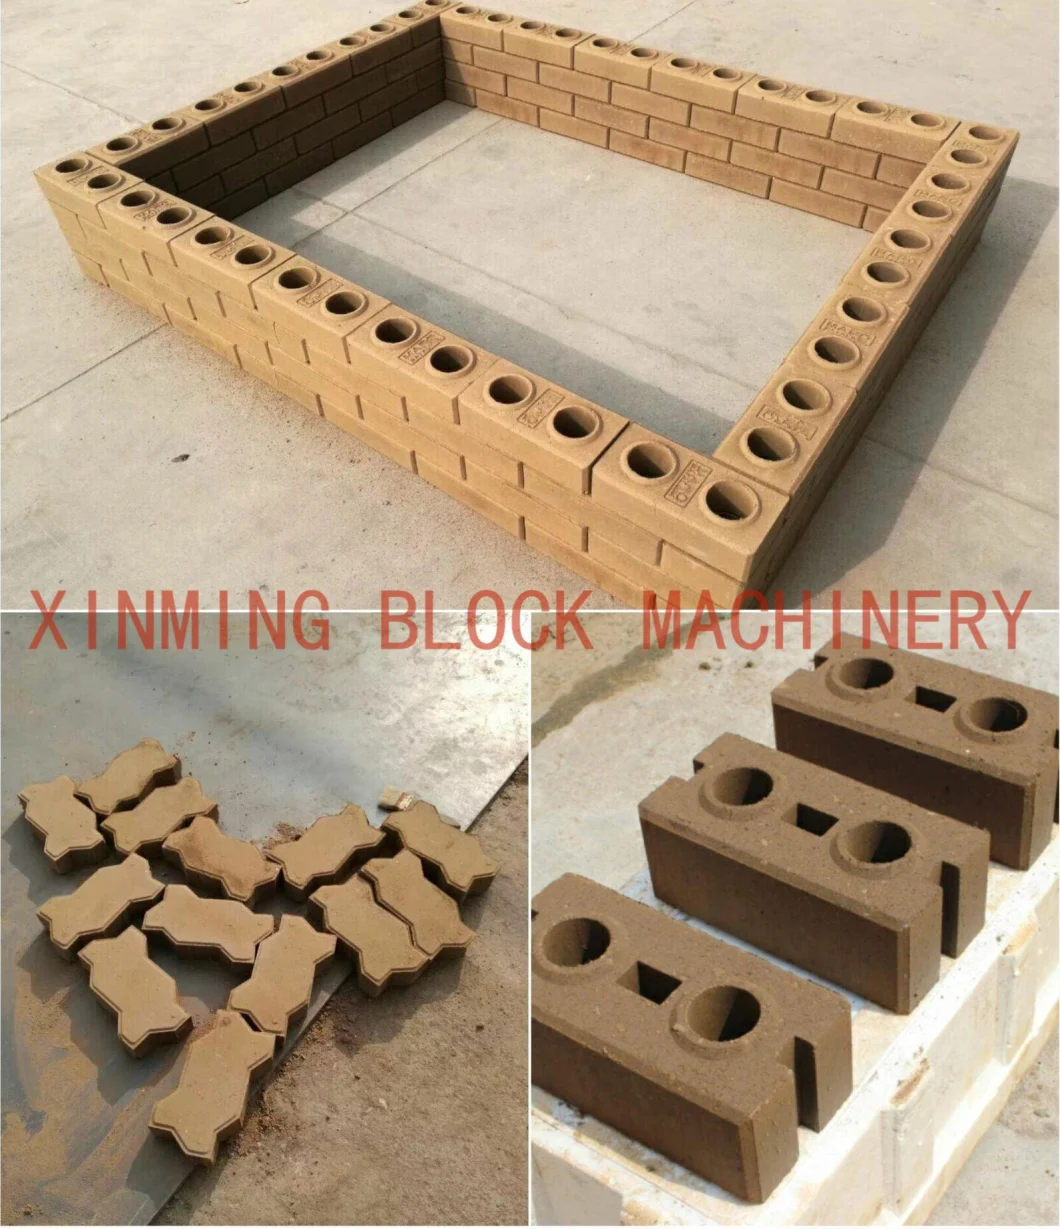 Xm 2-25 Semi Automatic Block Machine Commercial Use Block Making Machine Make Bricks, Stone by Clay, Soil or Any Other Materials